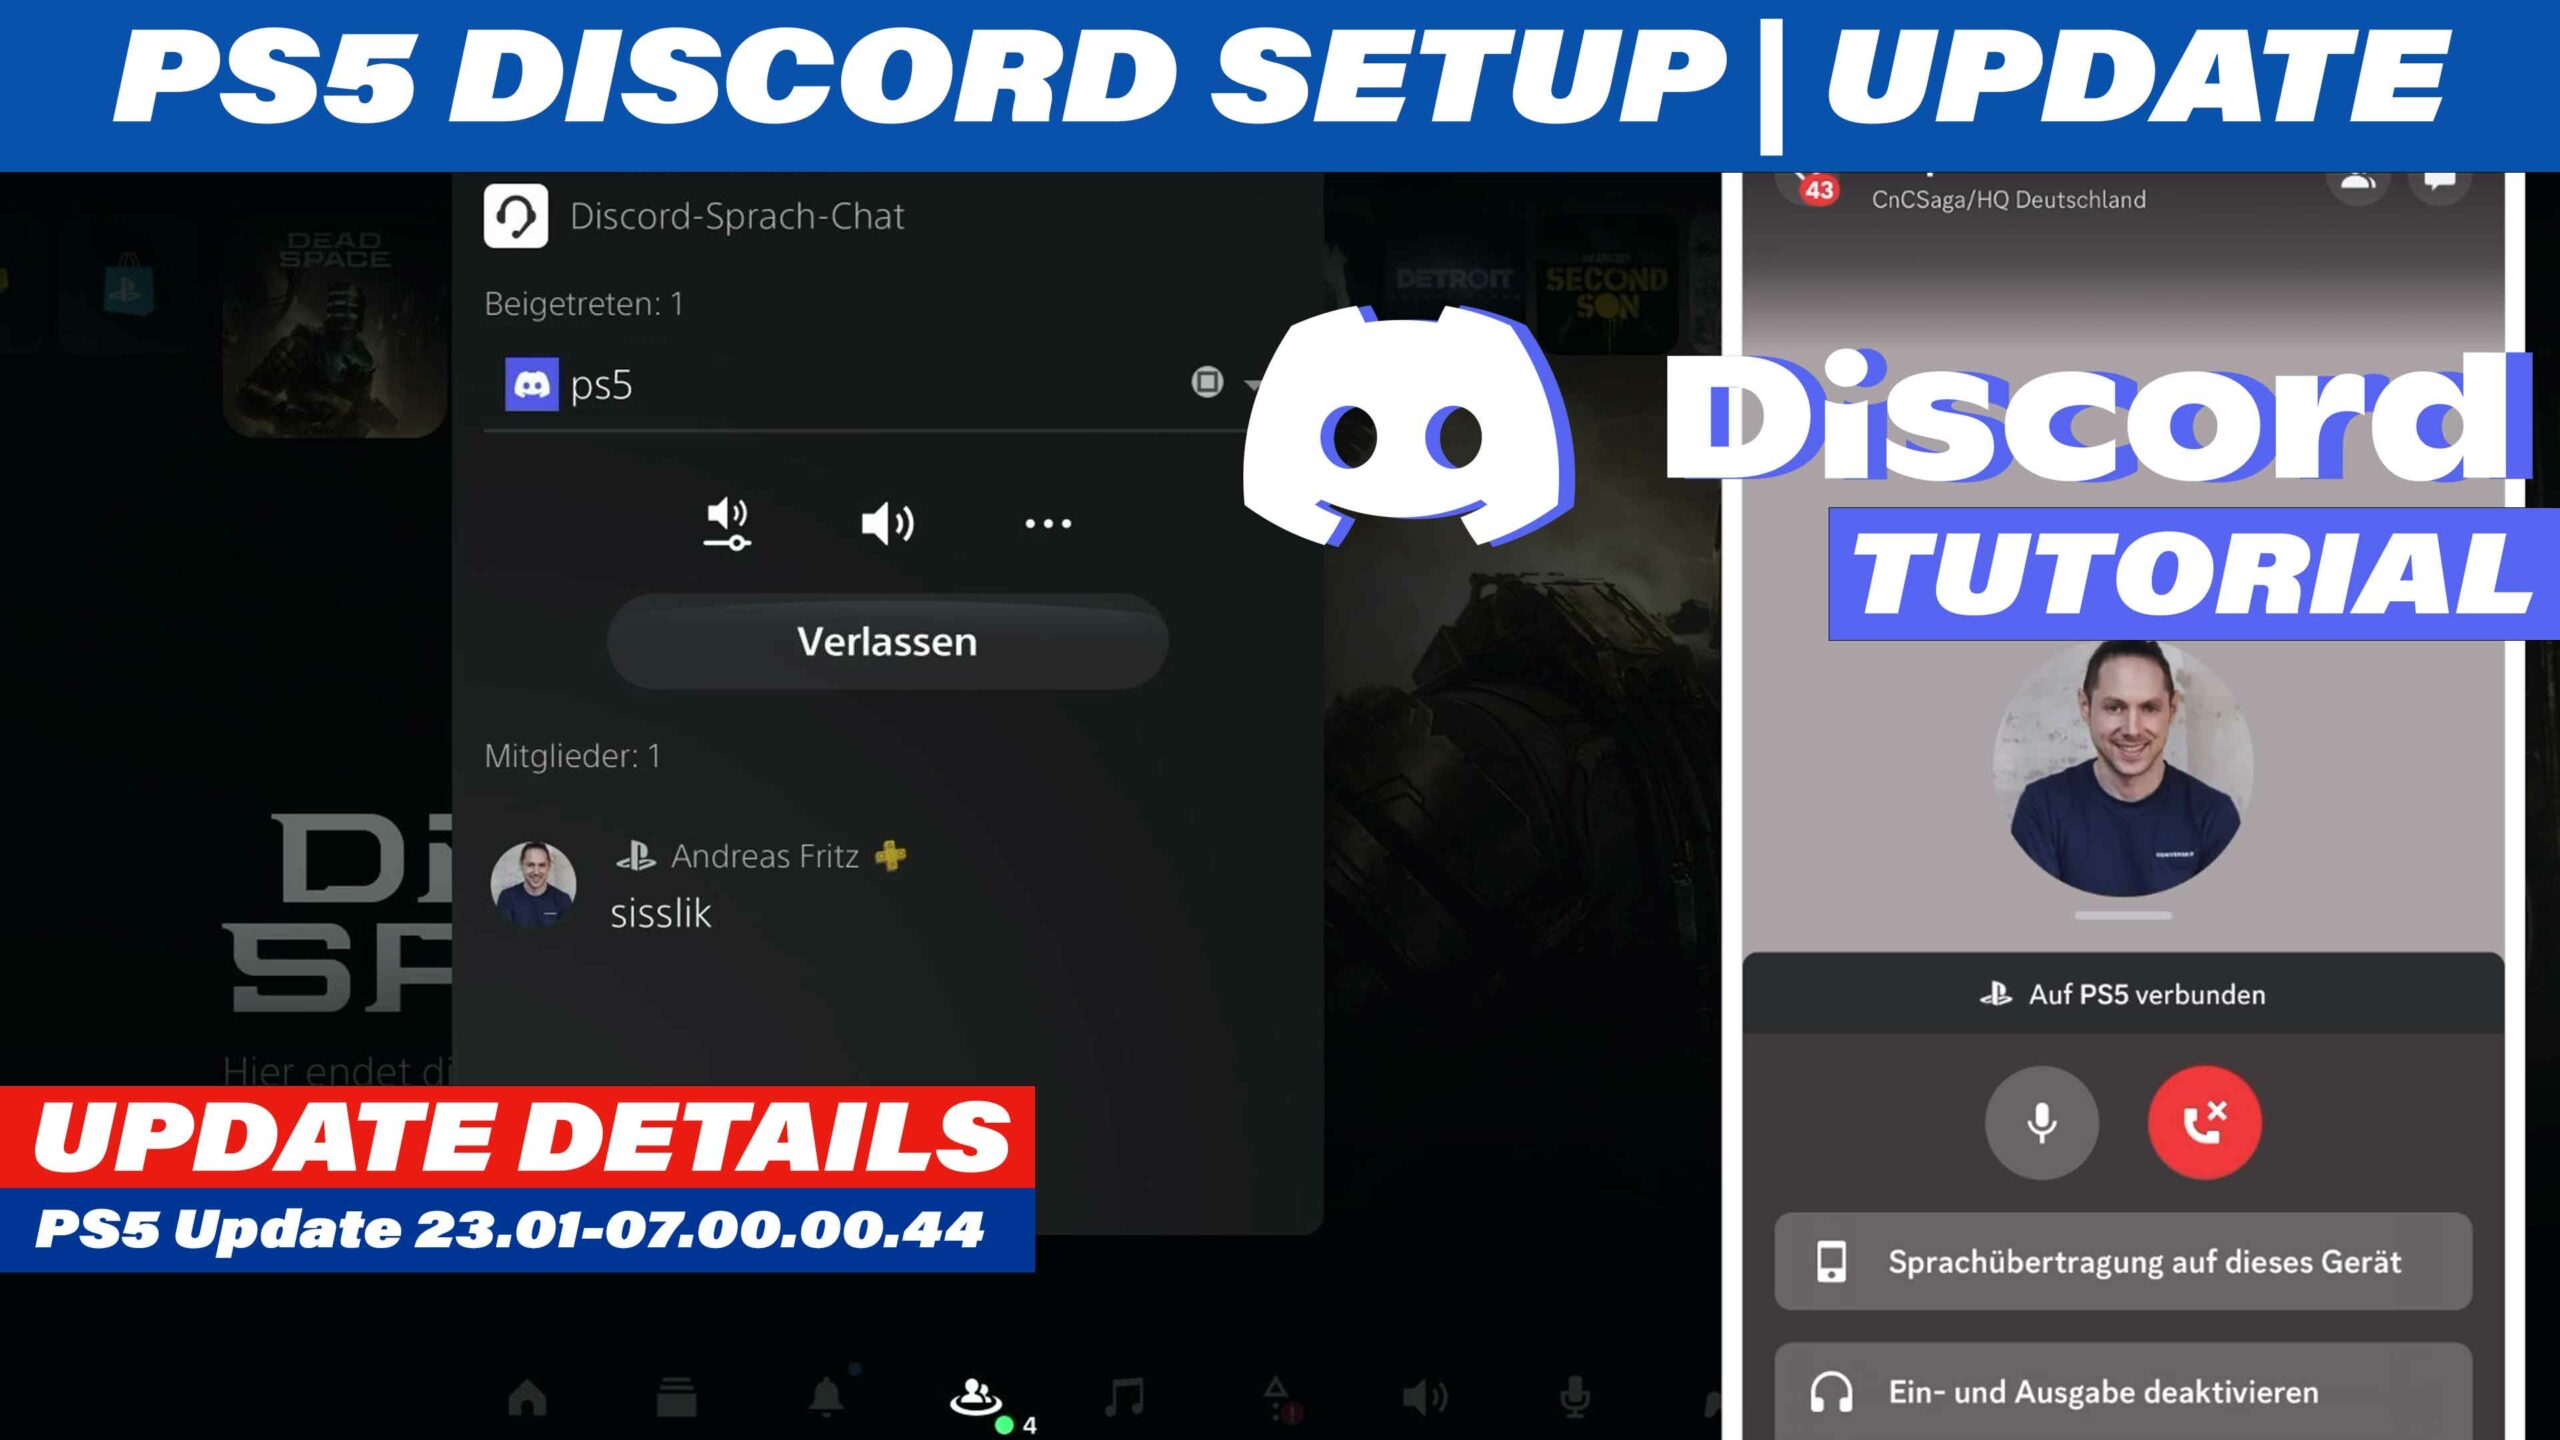 PS5 Discord Update | How to get Discord on PS5 | PlayStation 5 Update 23.01-07.00.00.44 | PS5 Games